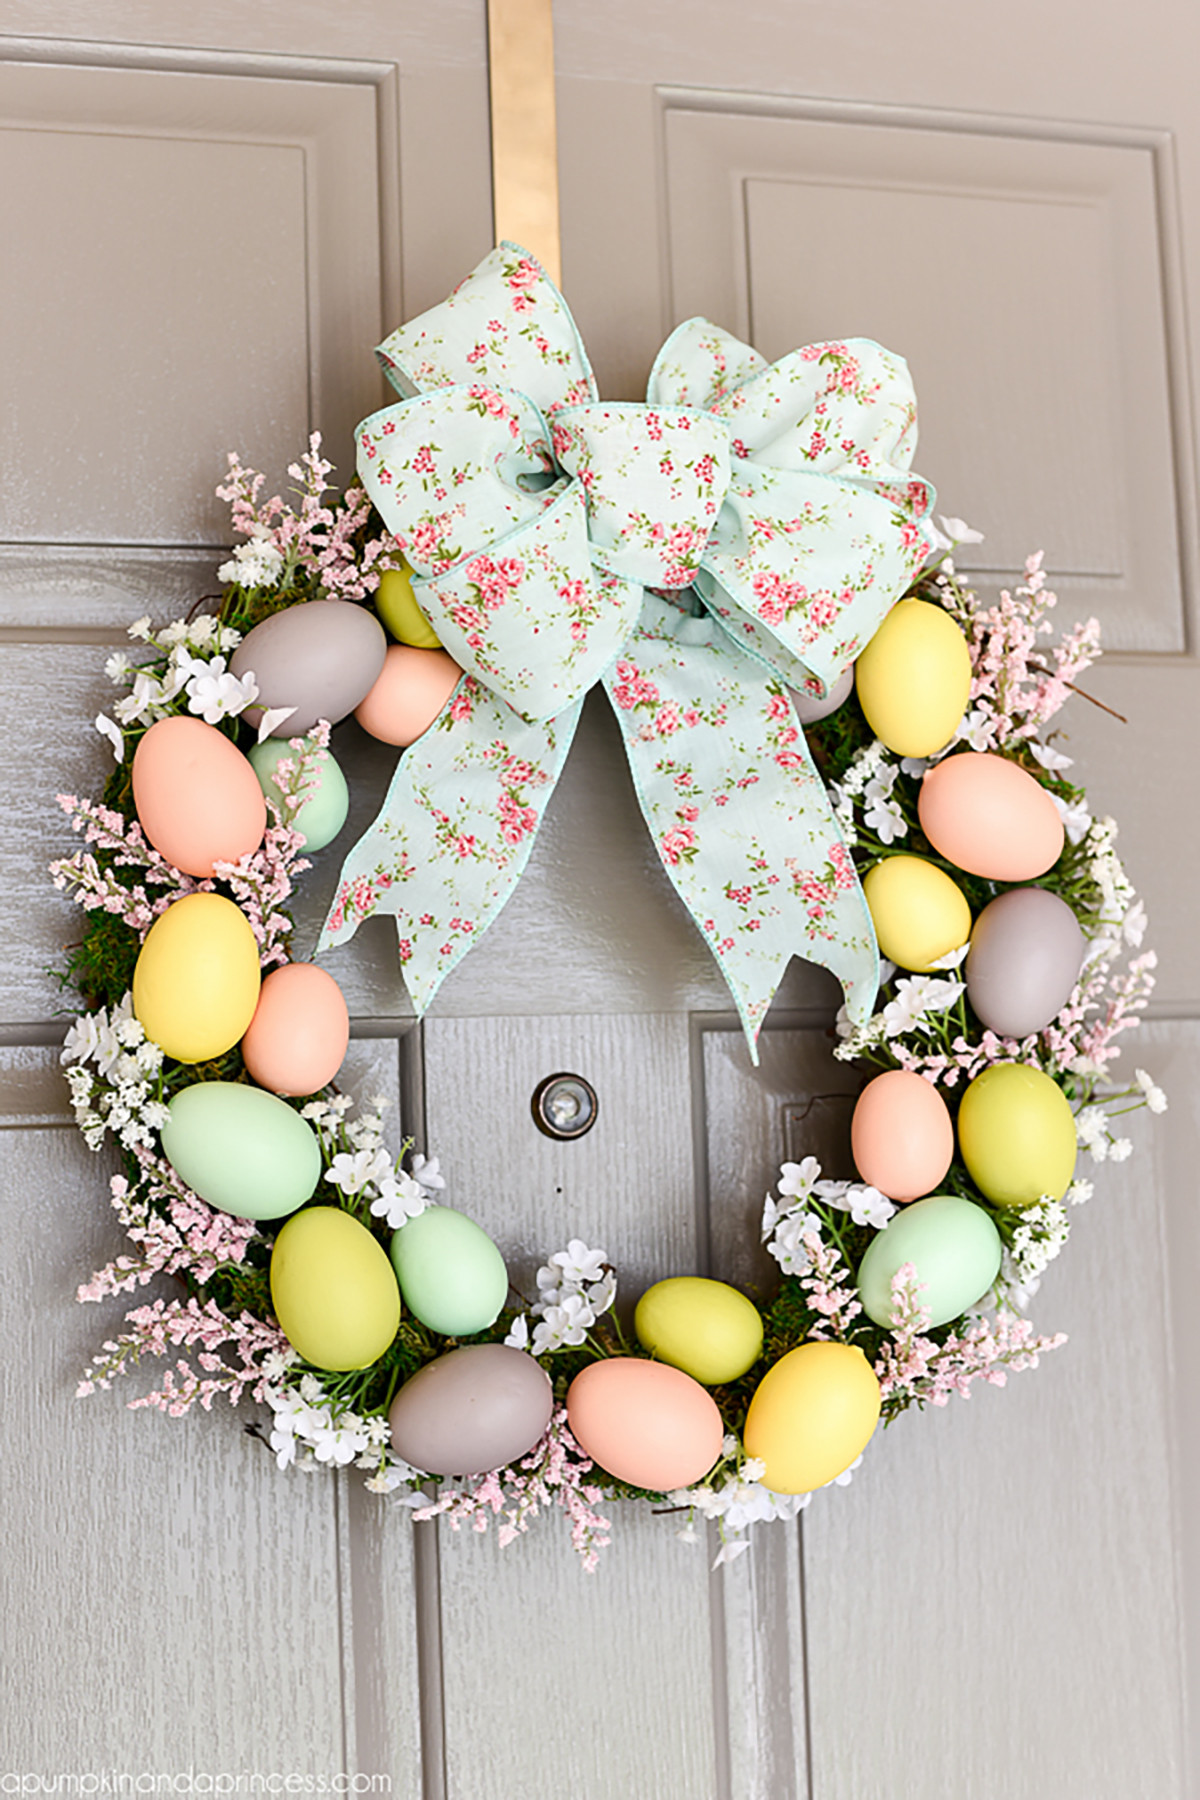 Diy For Easter
 10 DIY Easter Wreath Ideas How to Make a Cute Easter